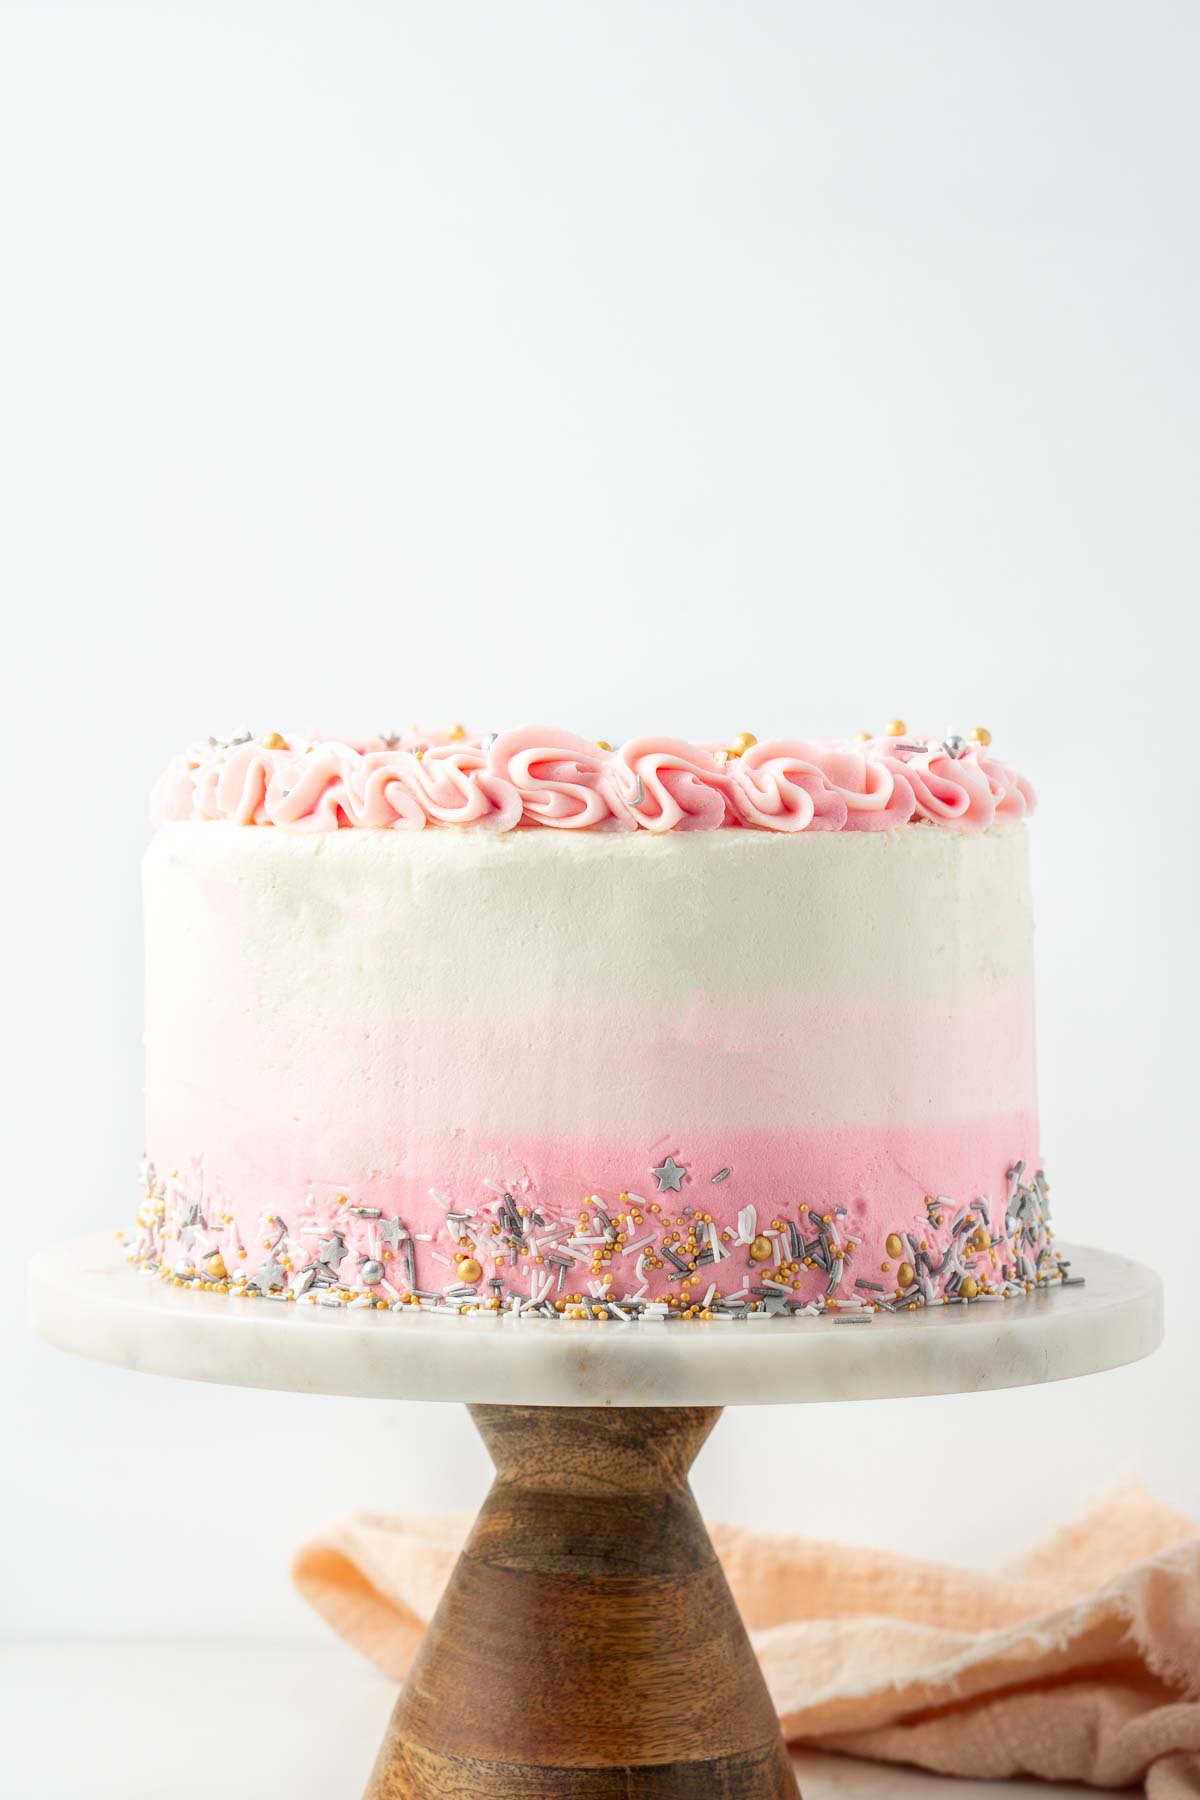 Vegan vanilla cake with pink ombre frosting on a marble and wood cake stand.